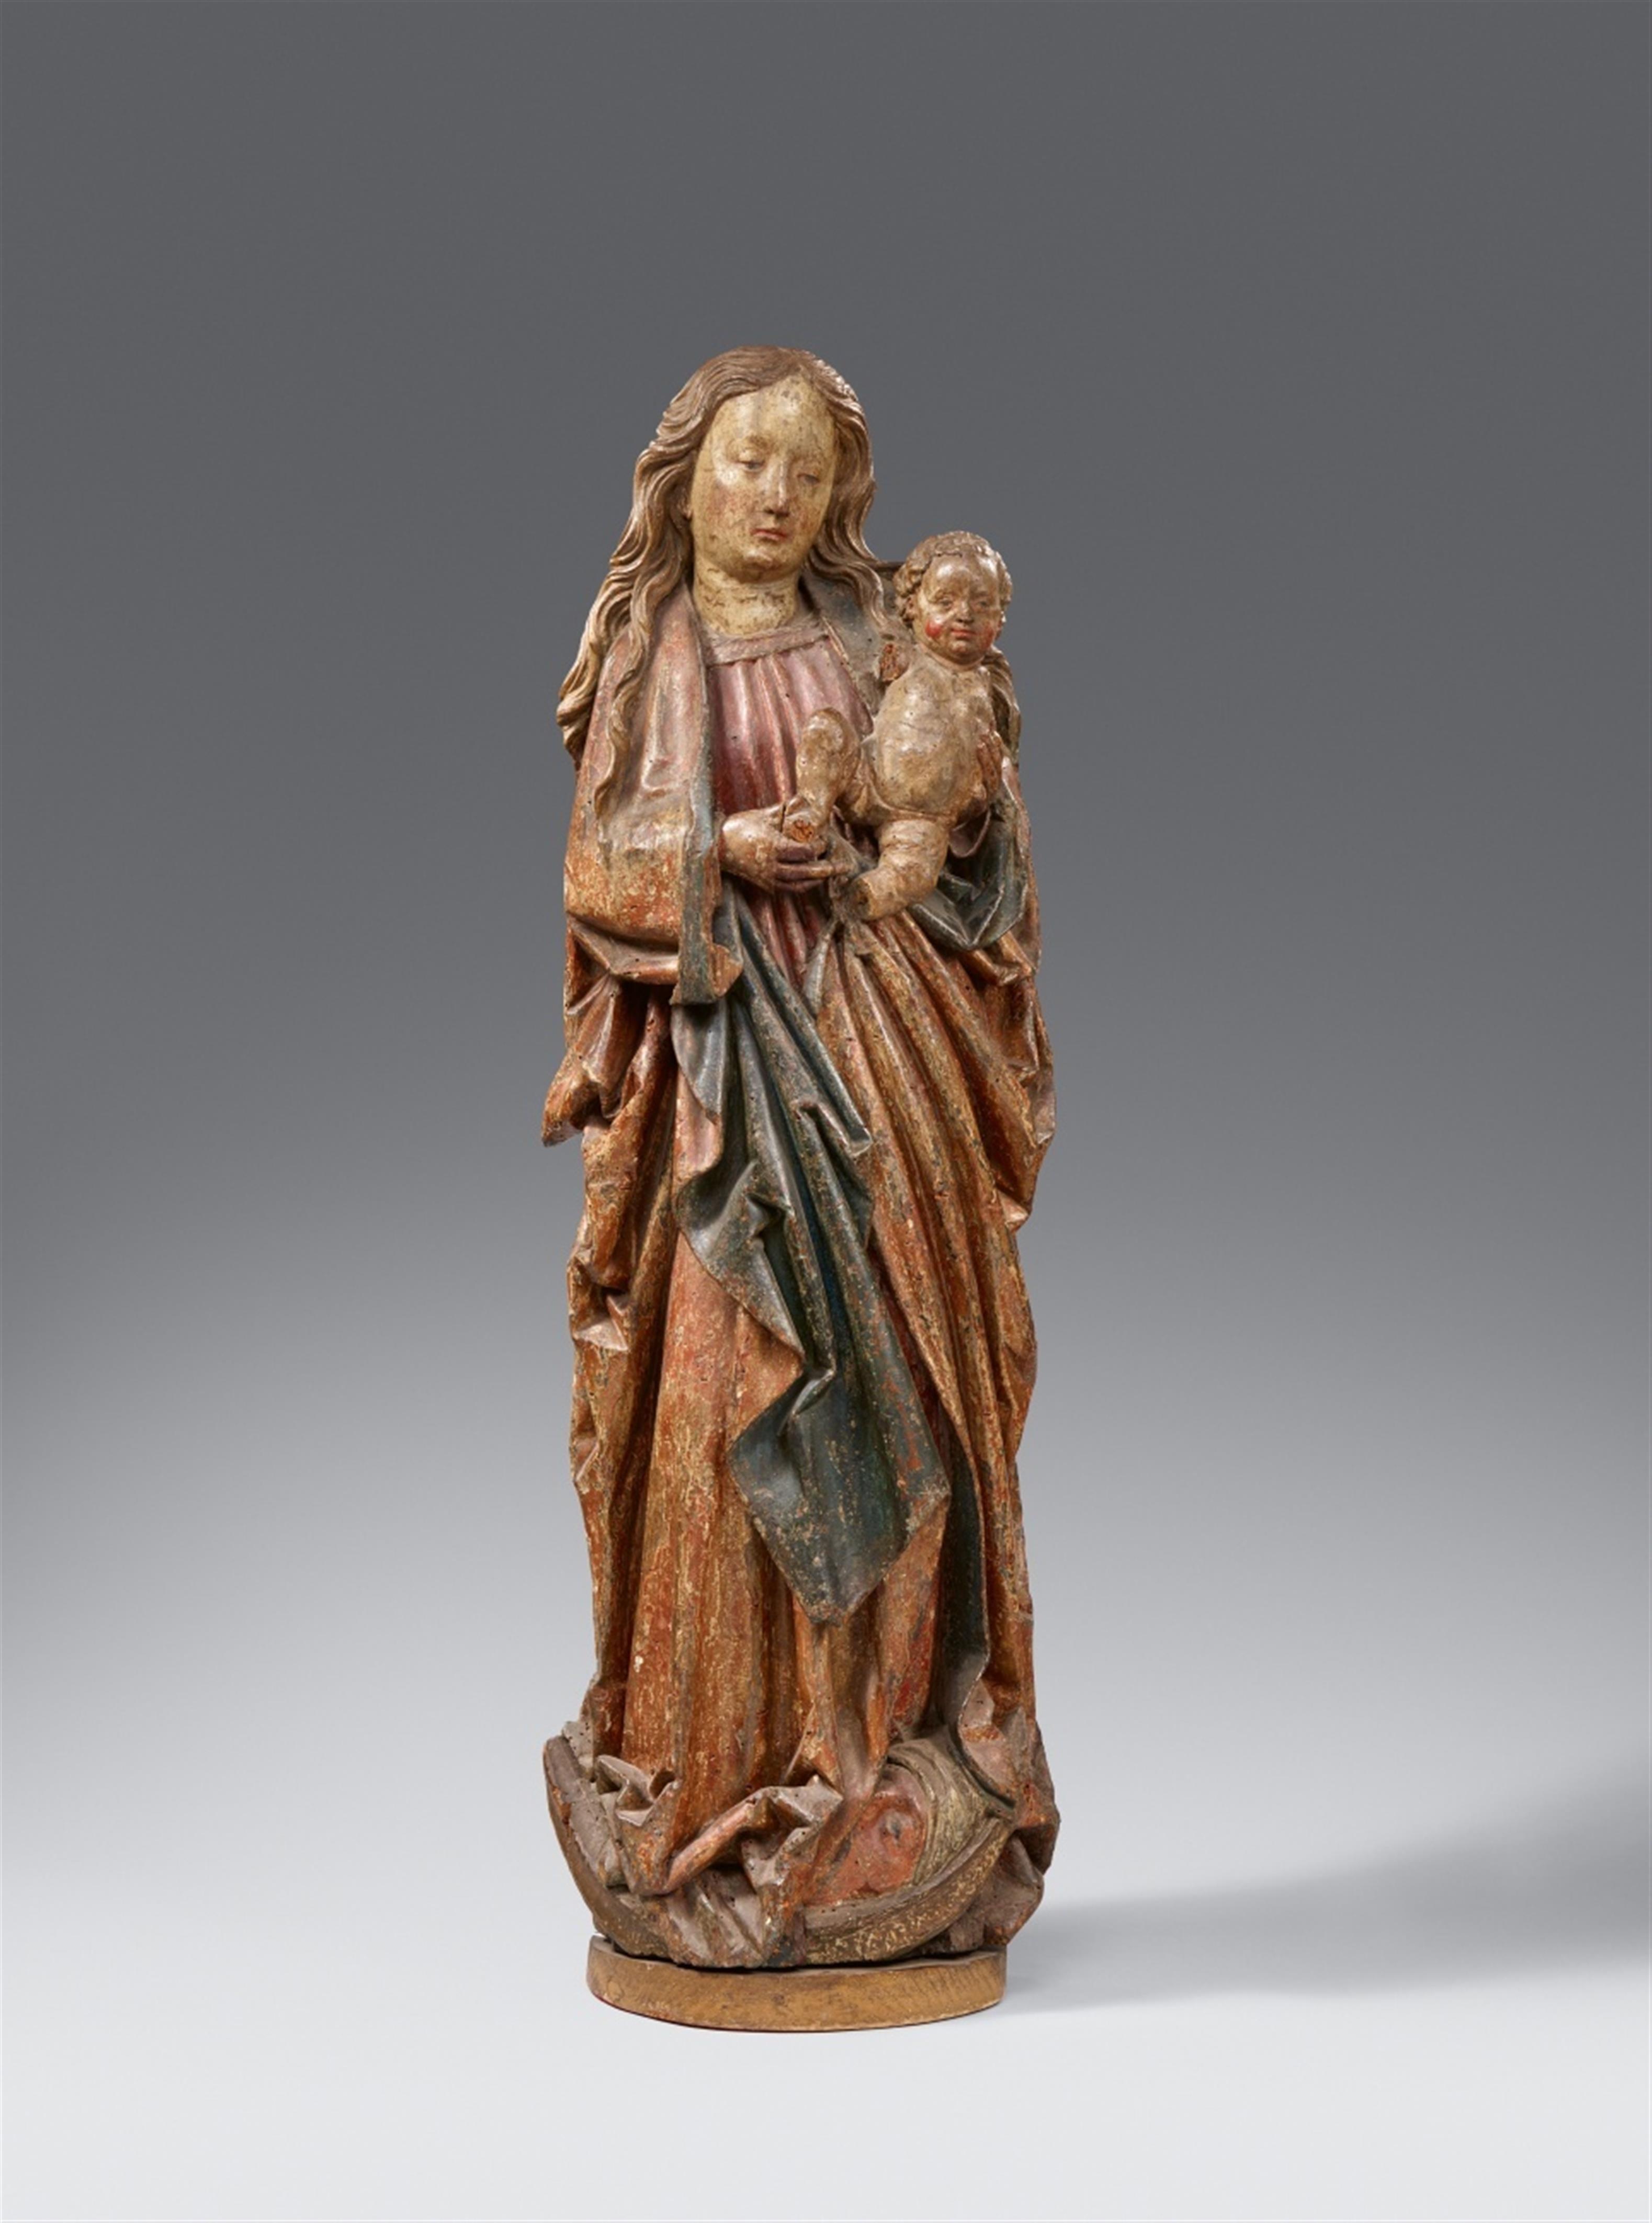 Franconia late 15th century - A late 15th century Franconian carved wood figure of the Virgin and Child - image-1